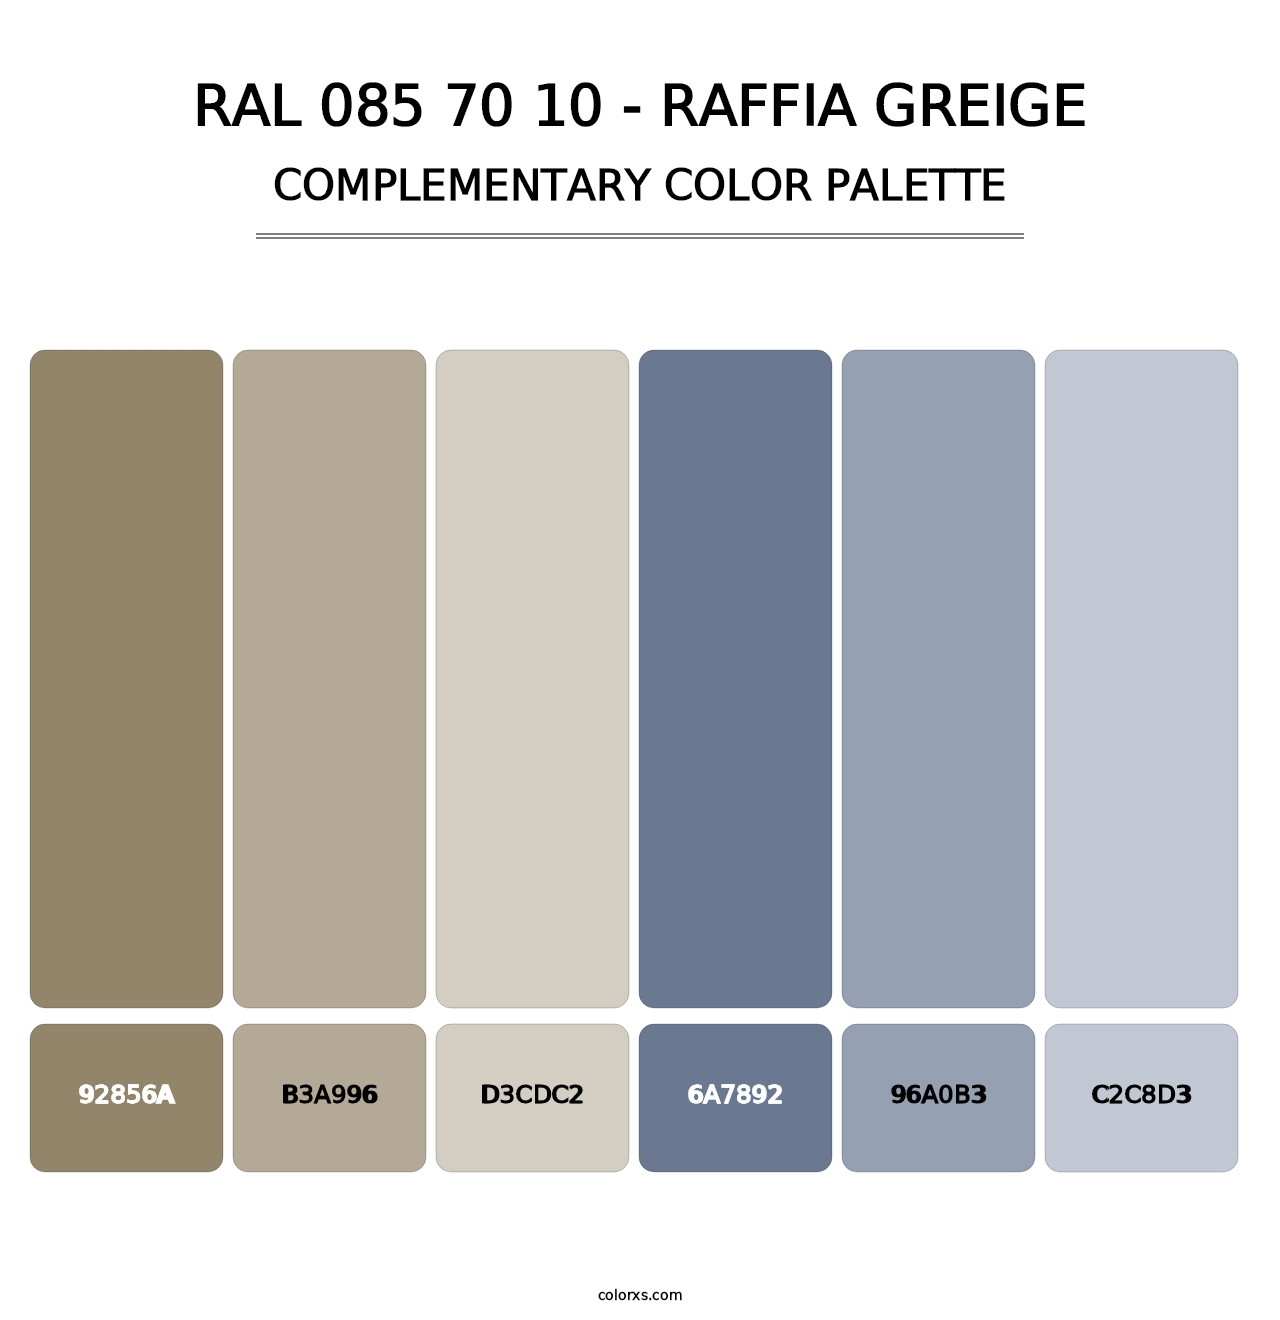 RAL 085 70 10 - Raffia Greige - Complementary Color Palette